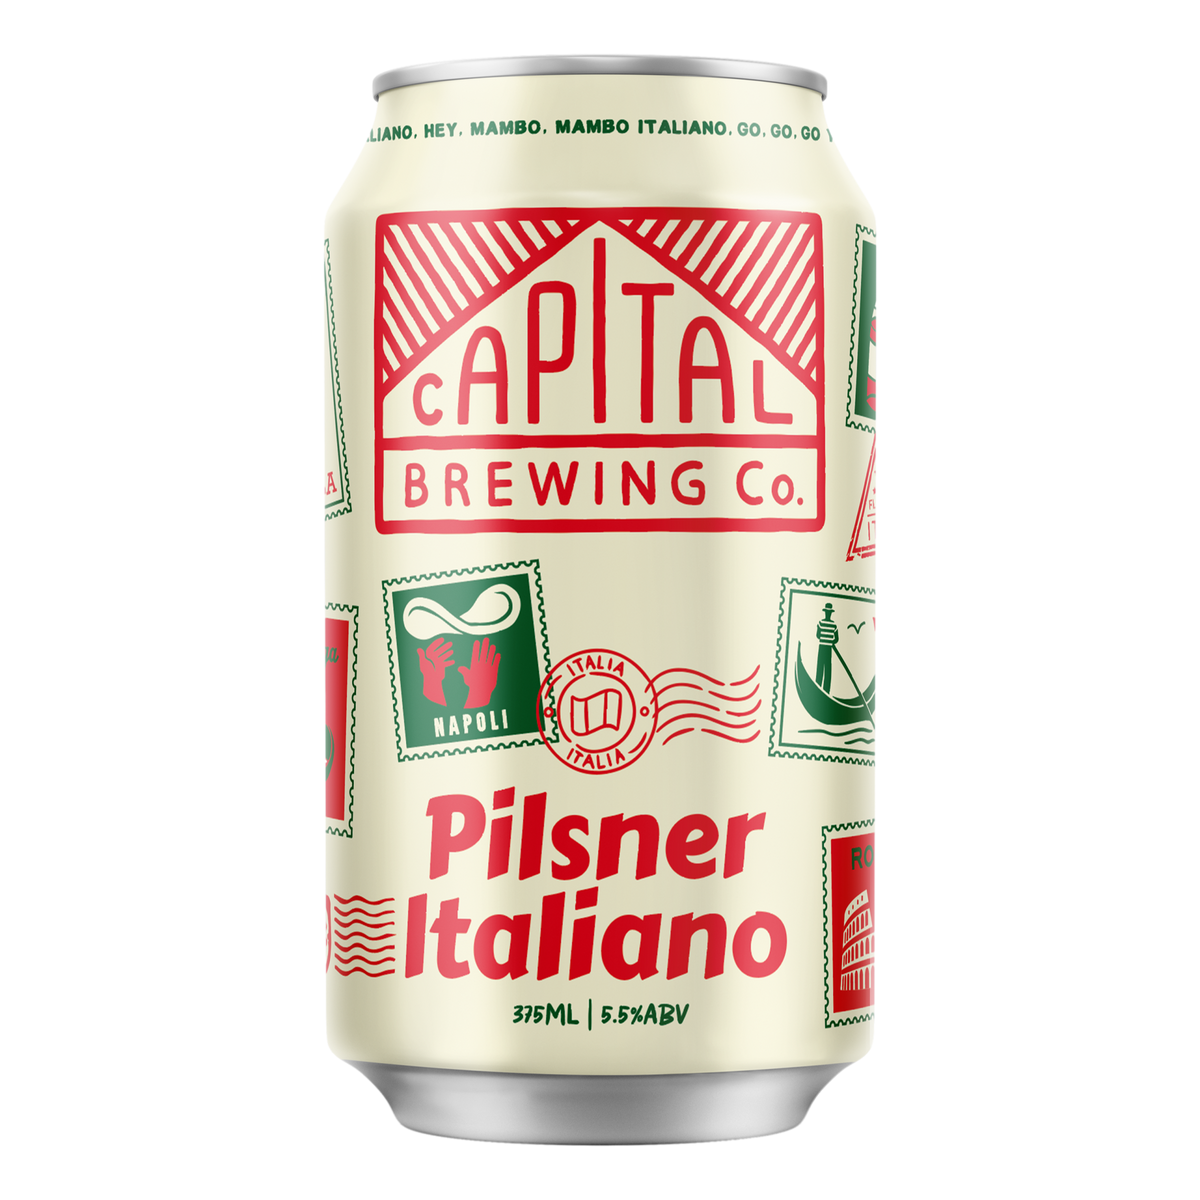 Capital Brewing Co. Pilsner Italiano 375ml Can Case of 16